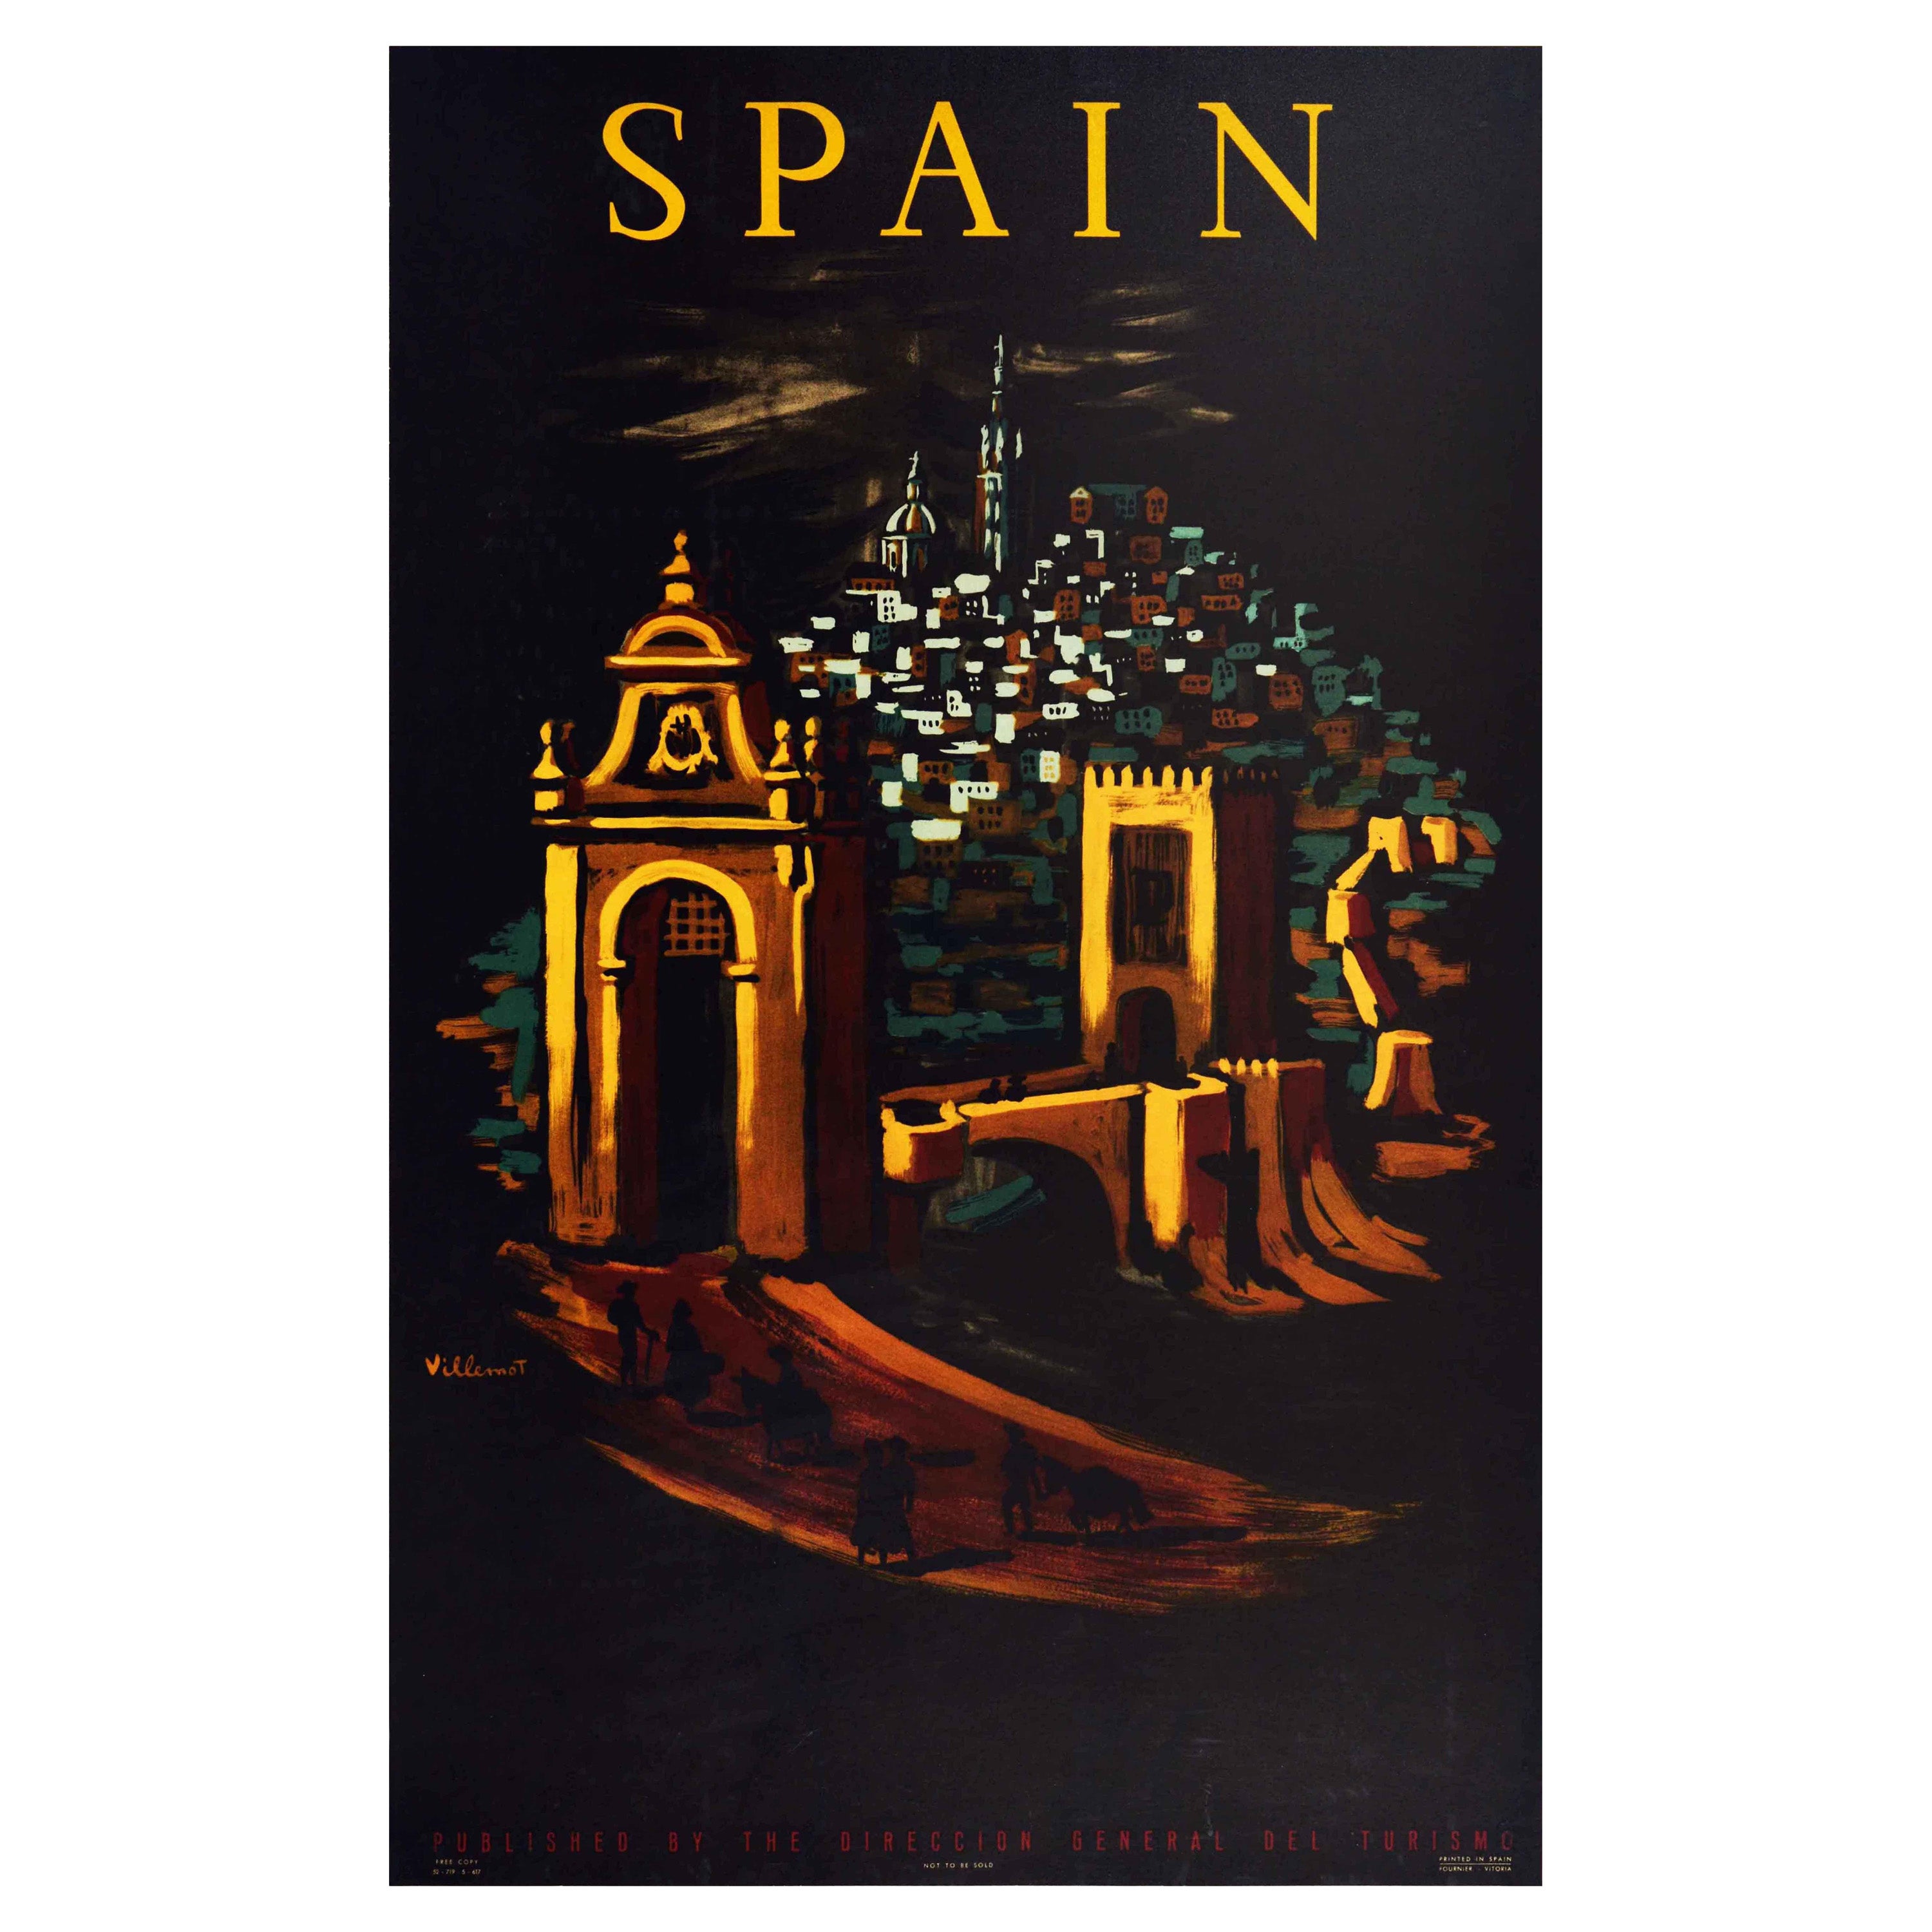 Original Vintage Travel Poster For Spain Ft. Walled City Gate Night View Artwork